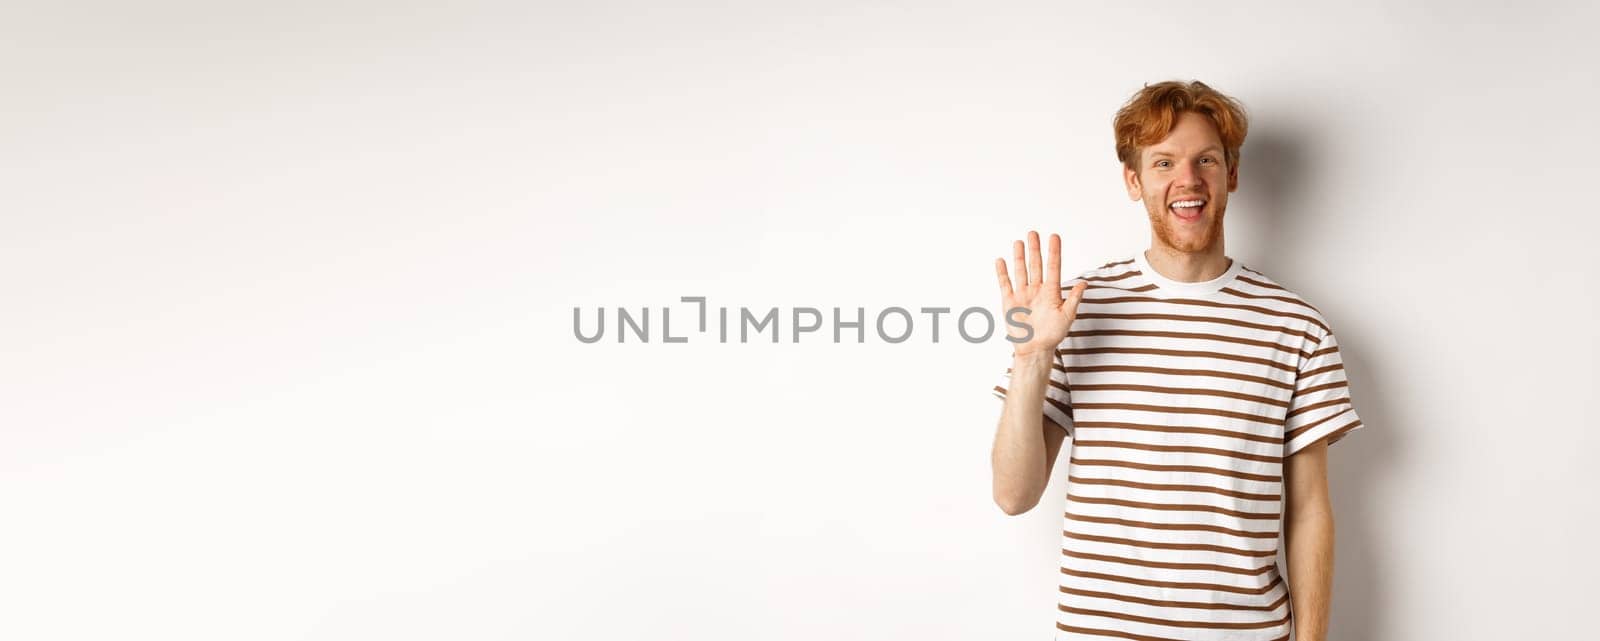 Friendly man with red hair and beard saying hi, waving hand and smiling, standing over white background.